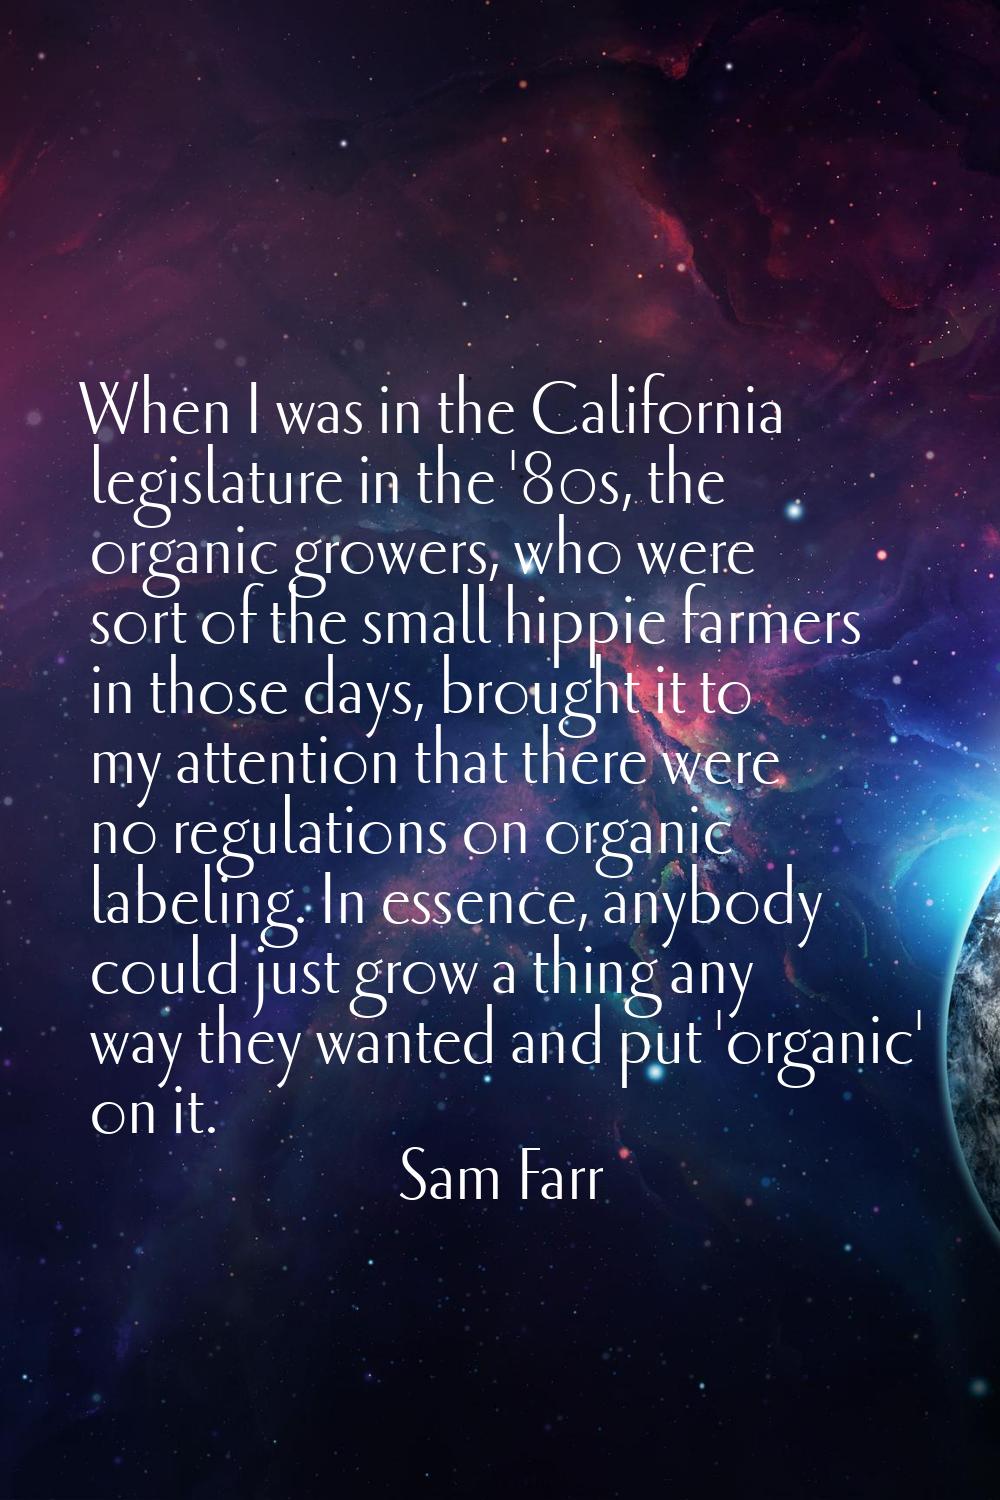 When I was in the California legislature in the '80s, the organic growers, who were sort of the sma